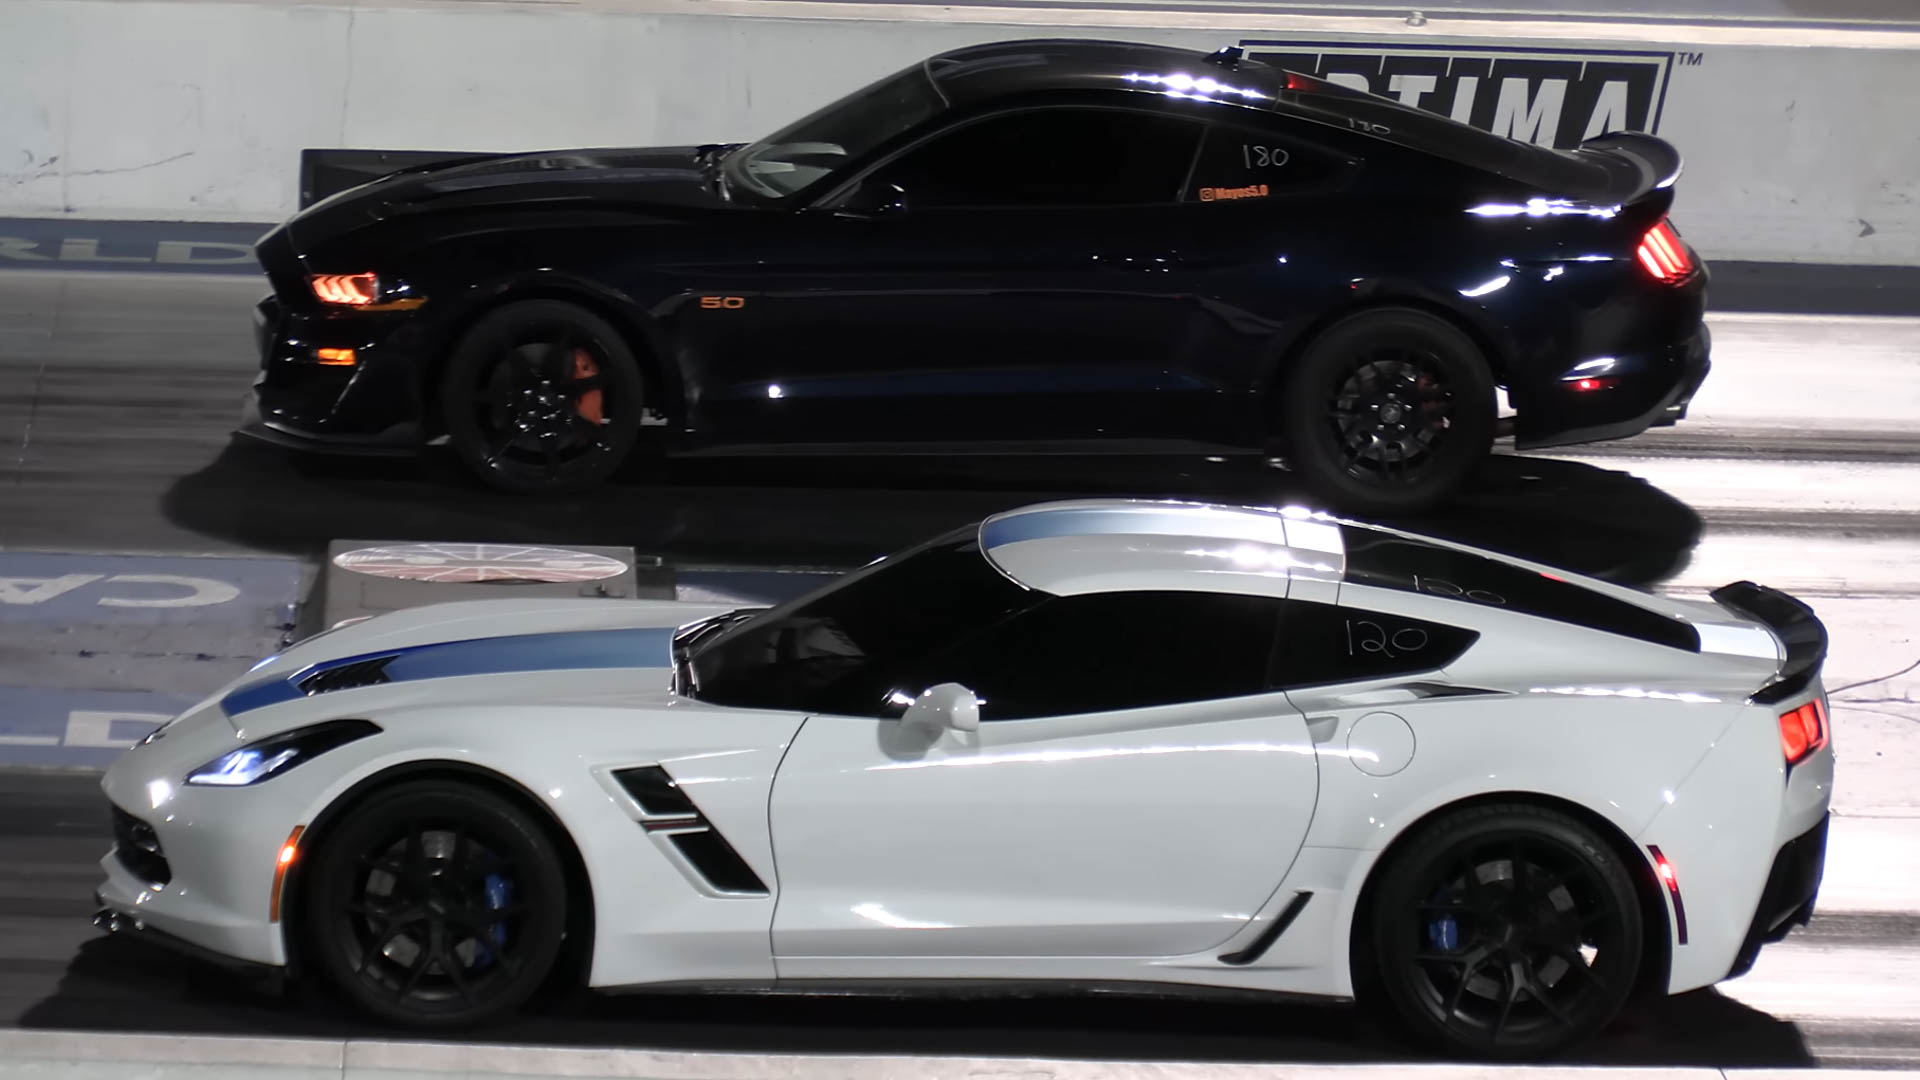 Ford Mustang vs C7 Corvette Drag Race Ends, How Else, With the Mustang in the Wall